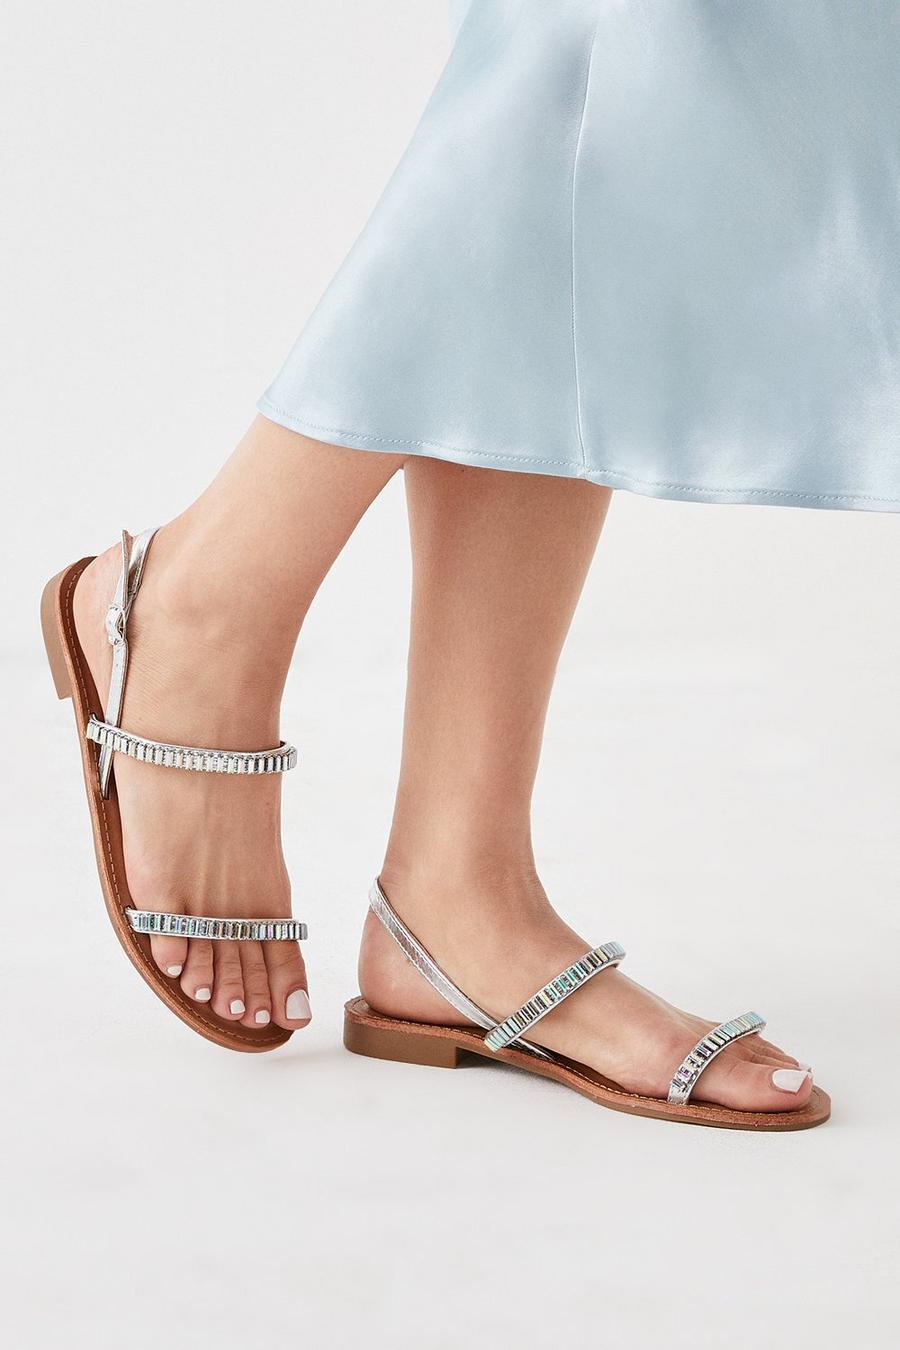 Faith: Mimi Sparkly Barely There Flat Sandals